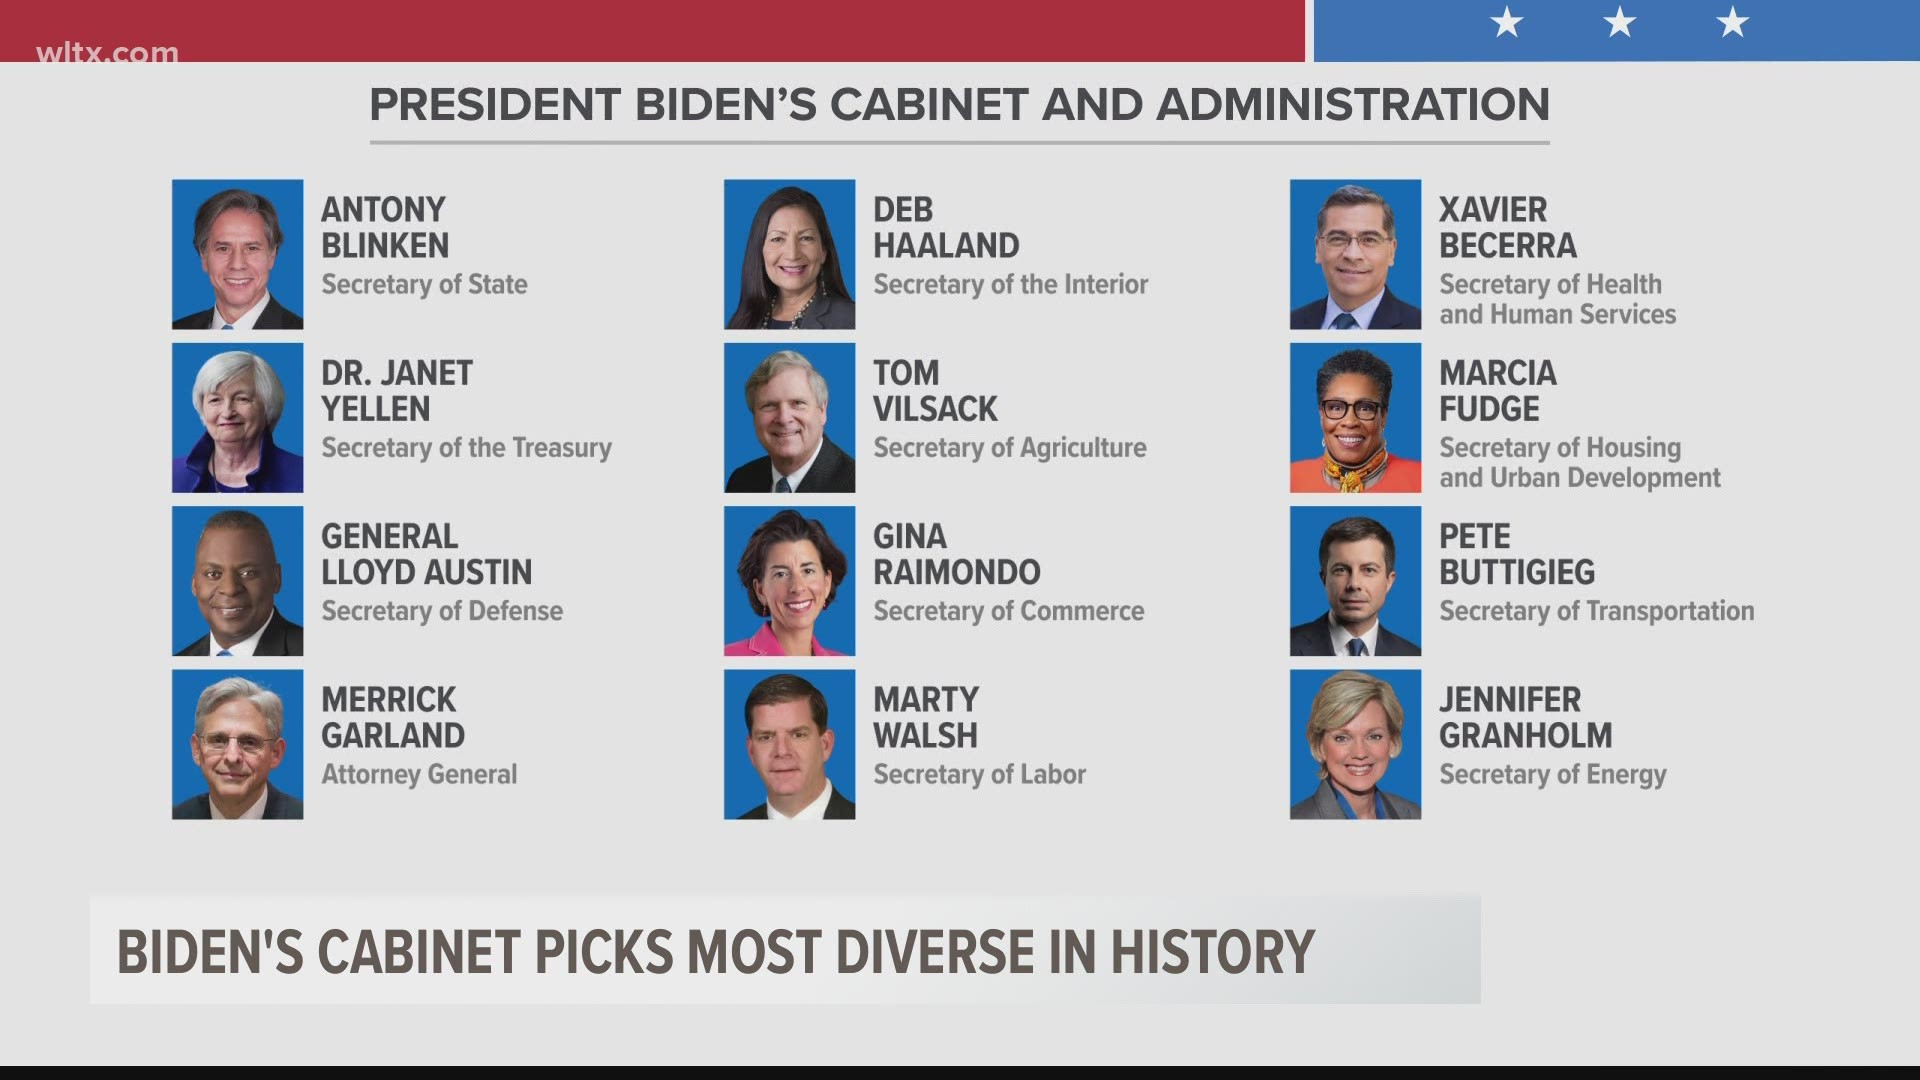 Should all of Joe Biden's Cabinet picks be approved, it will be the most diverse administration to-date.